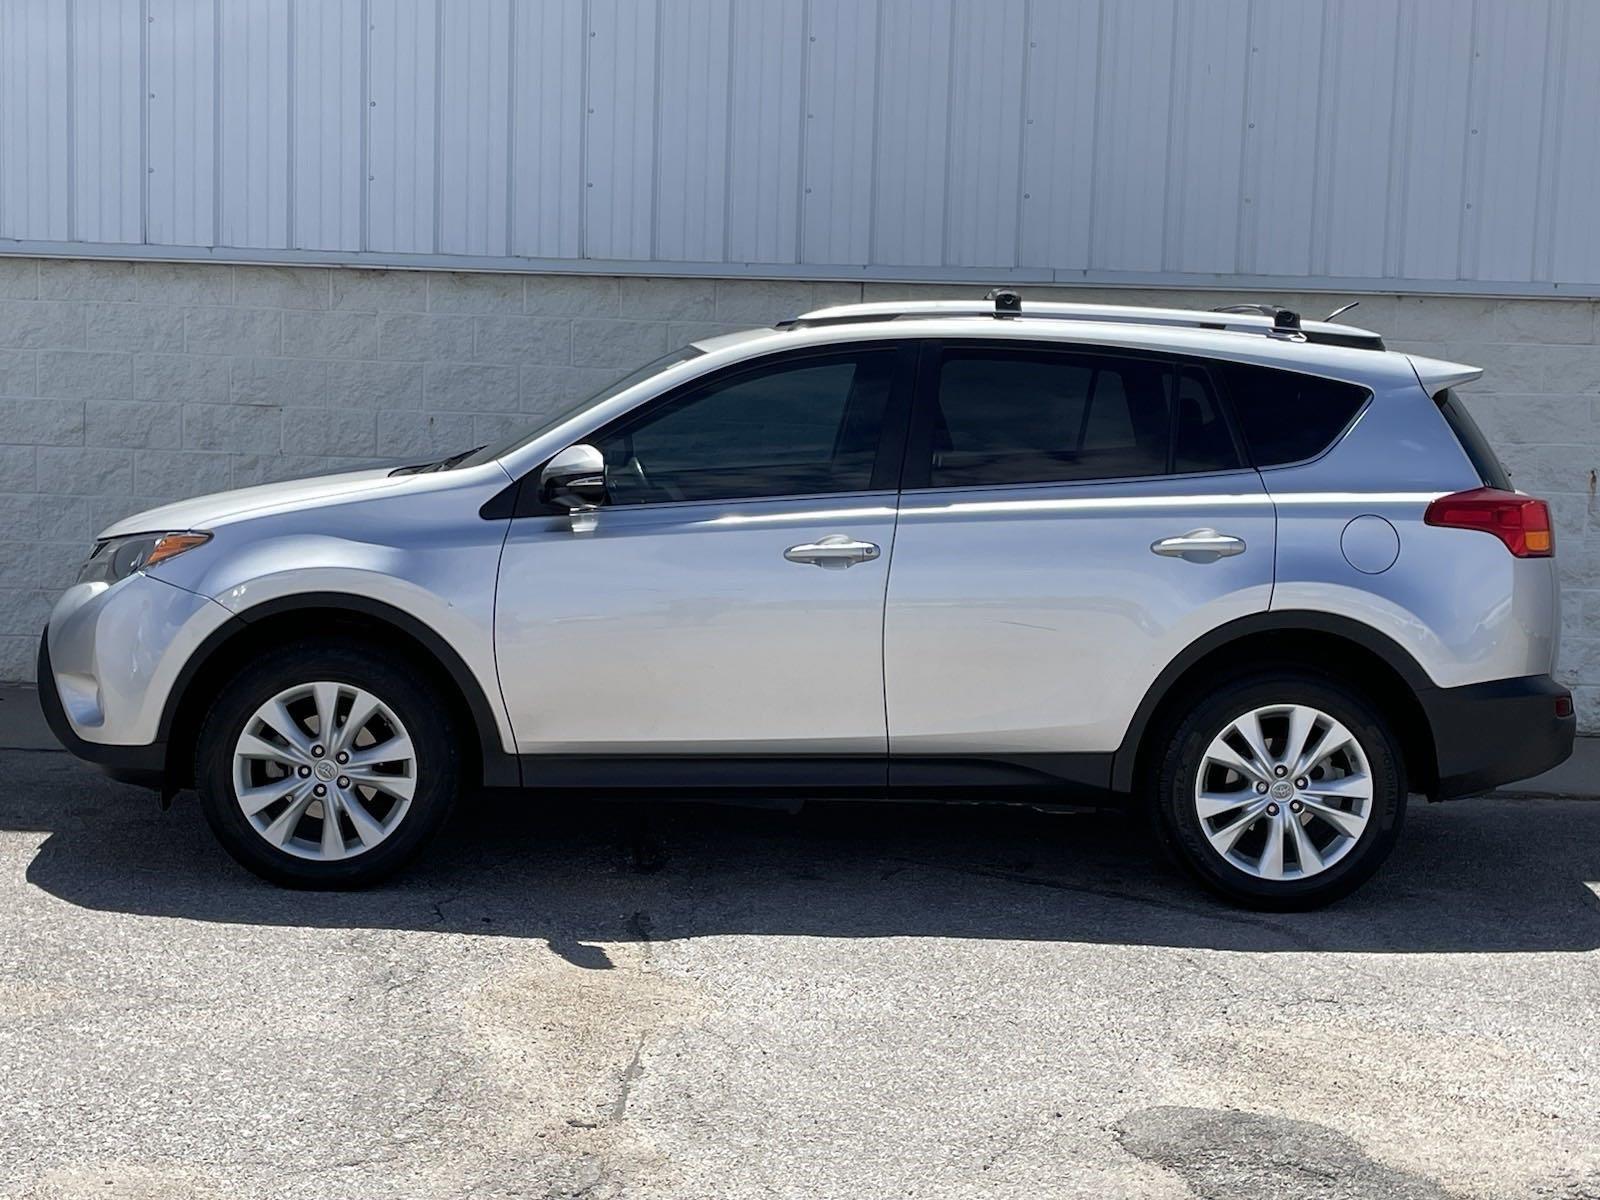 Used 2015 Toyota RAV4 Limited Sport Utility for sale in Lincoln NE